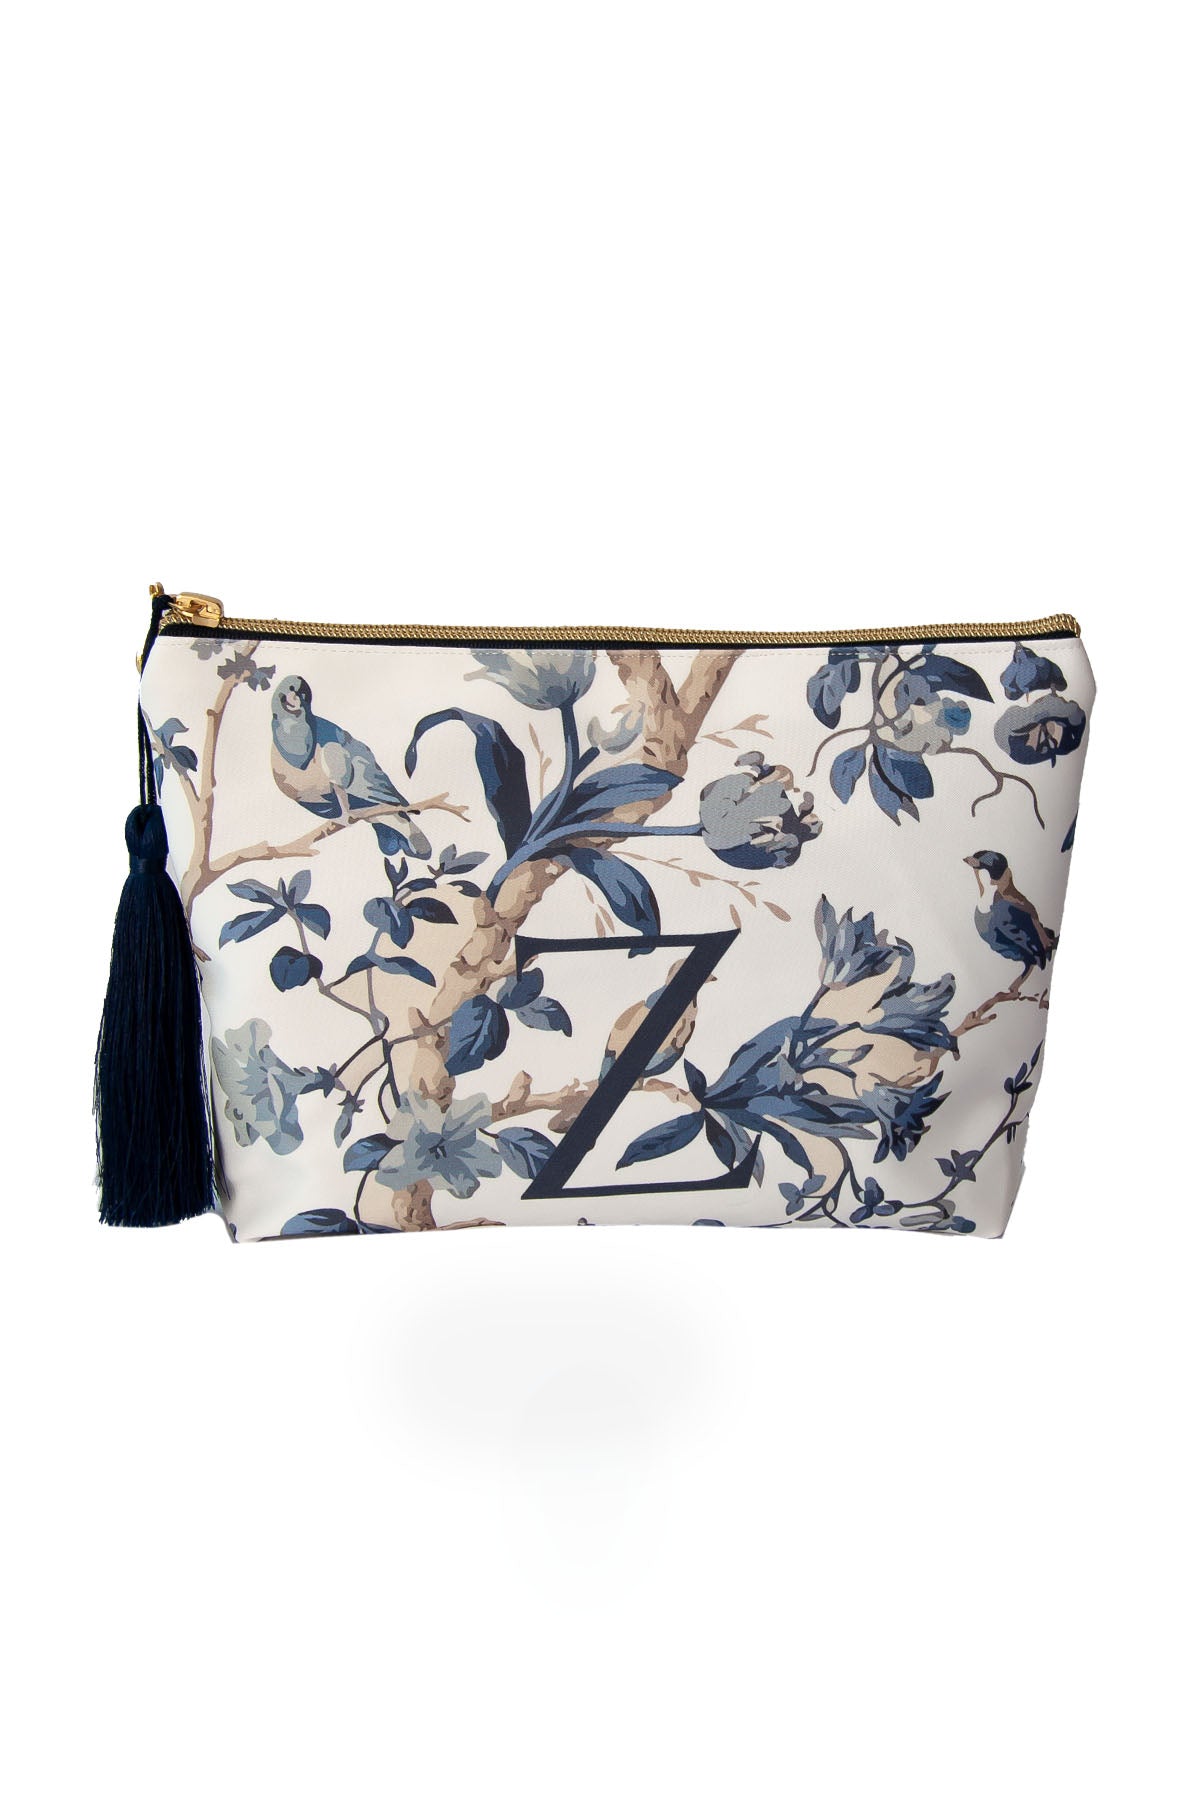 CLUTCH BAG WITH BLUE PATTERN